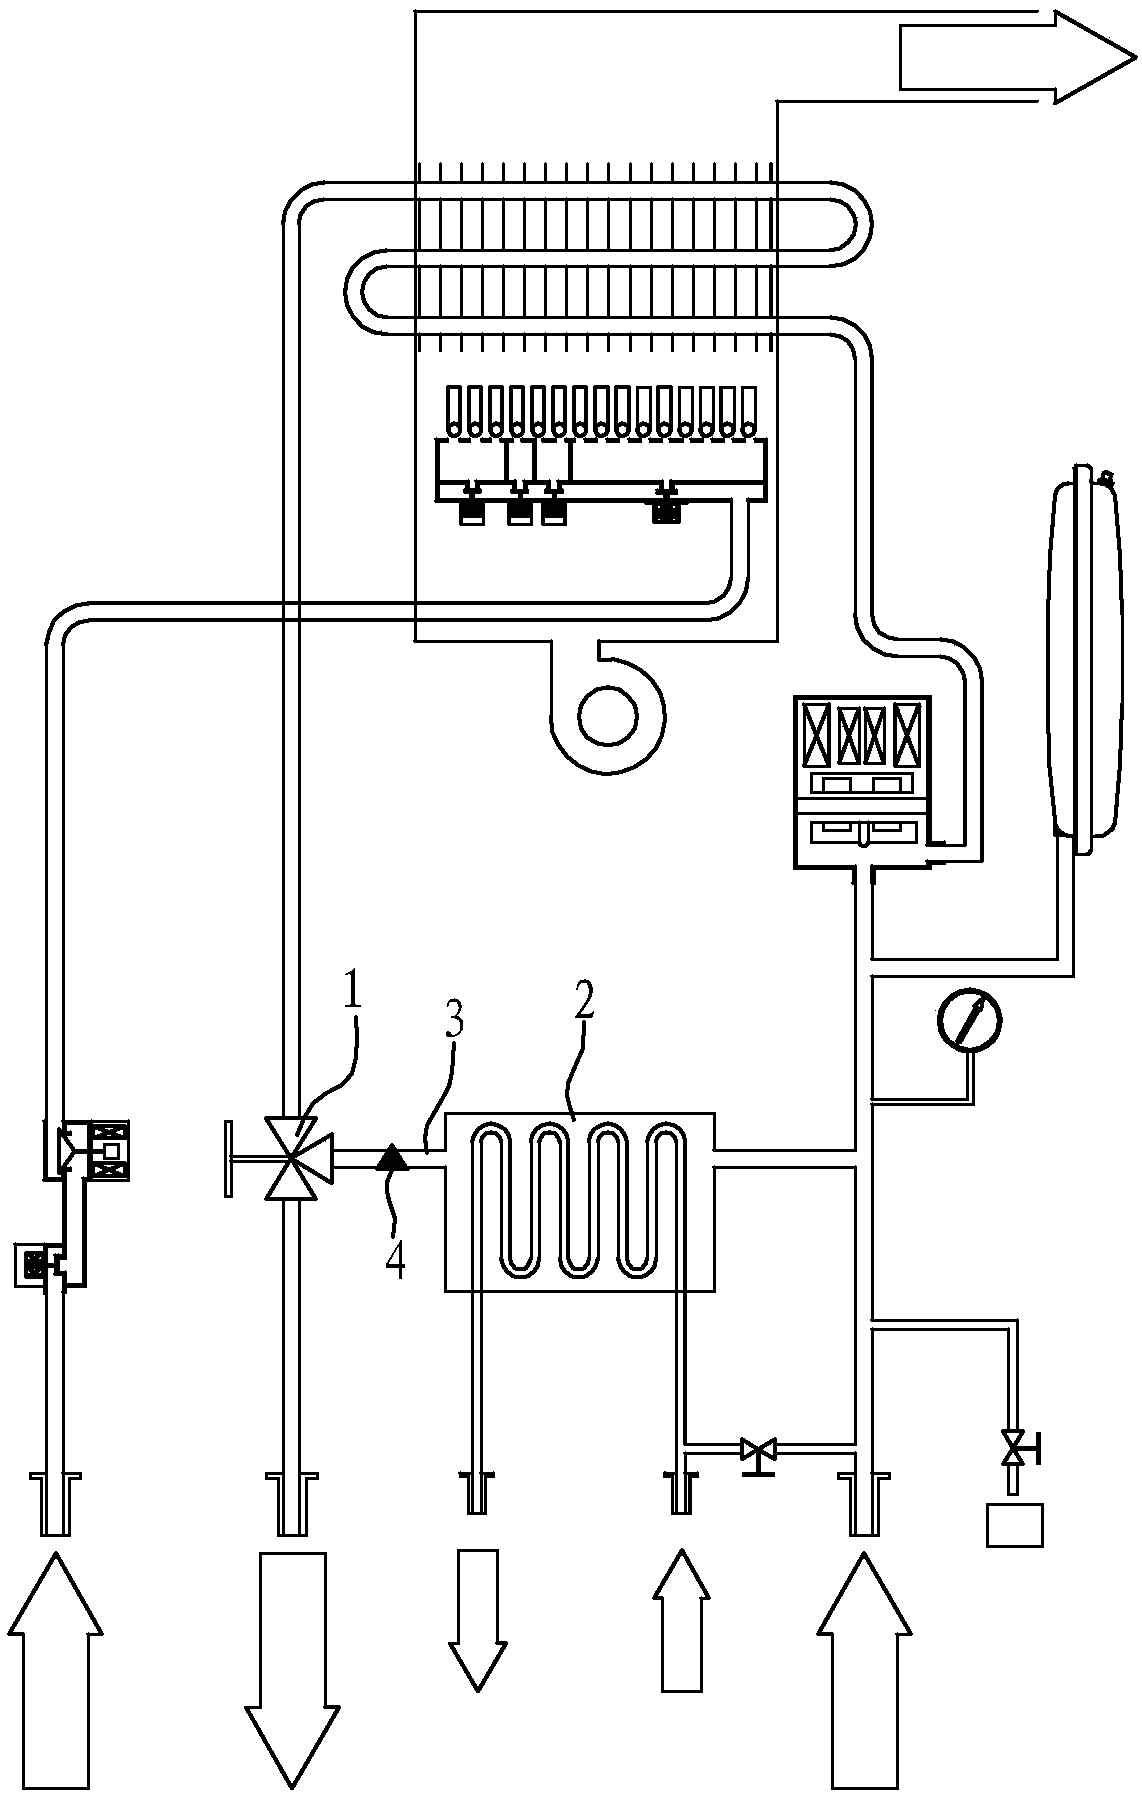 Fault detection method of three-way valve in dual-purpose furnace